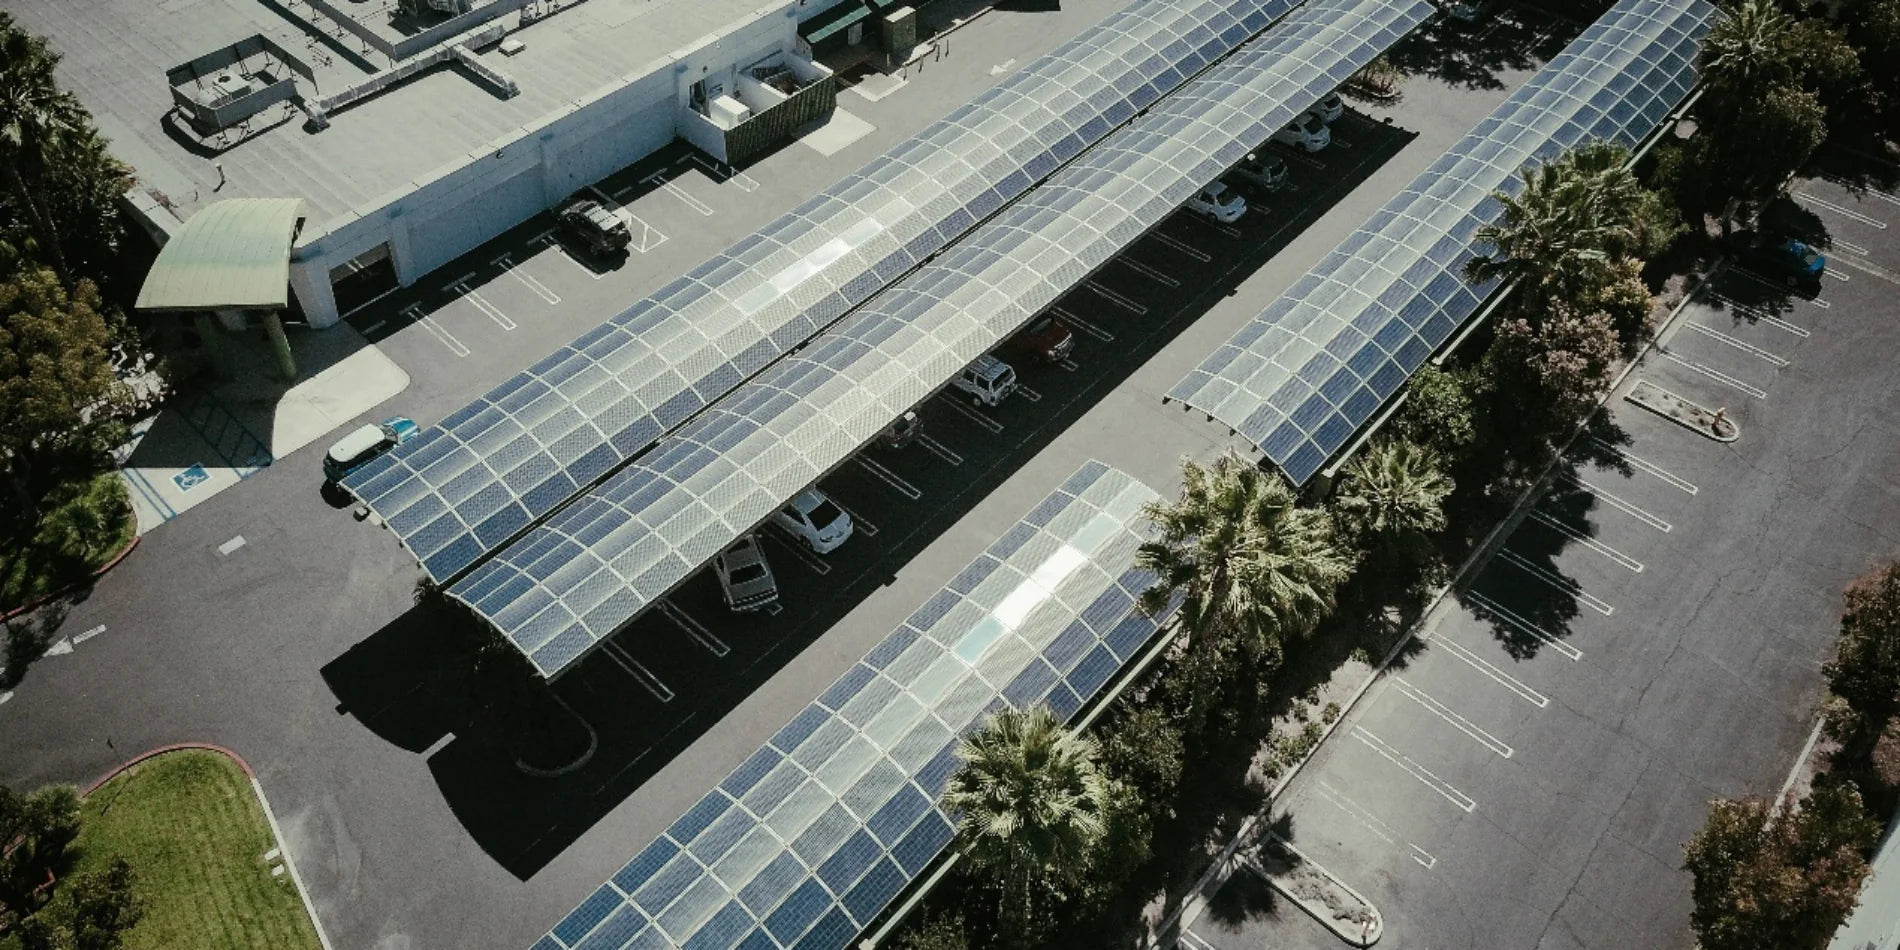 Cigs Solar Panels for Commercial Applications